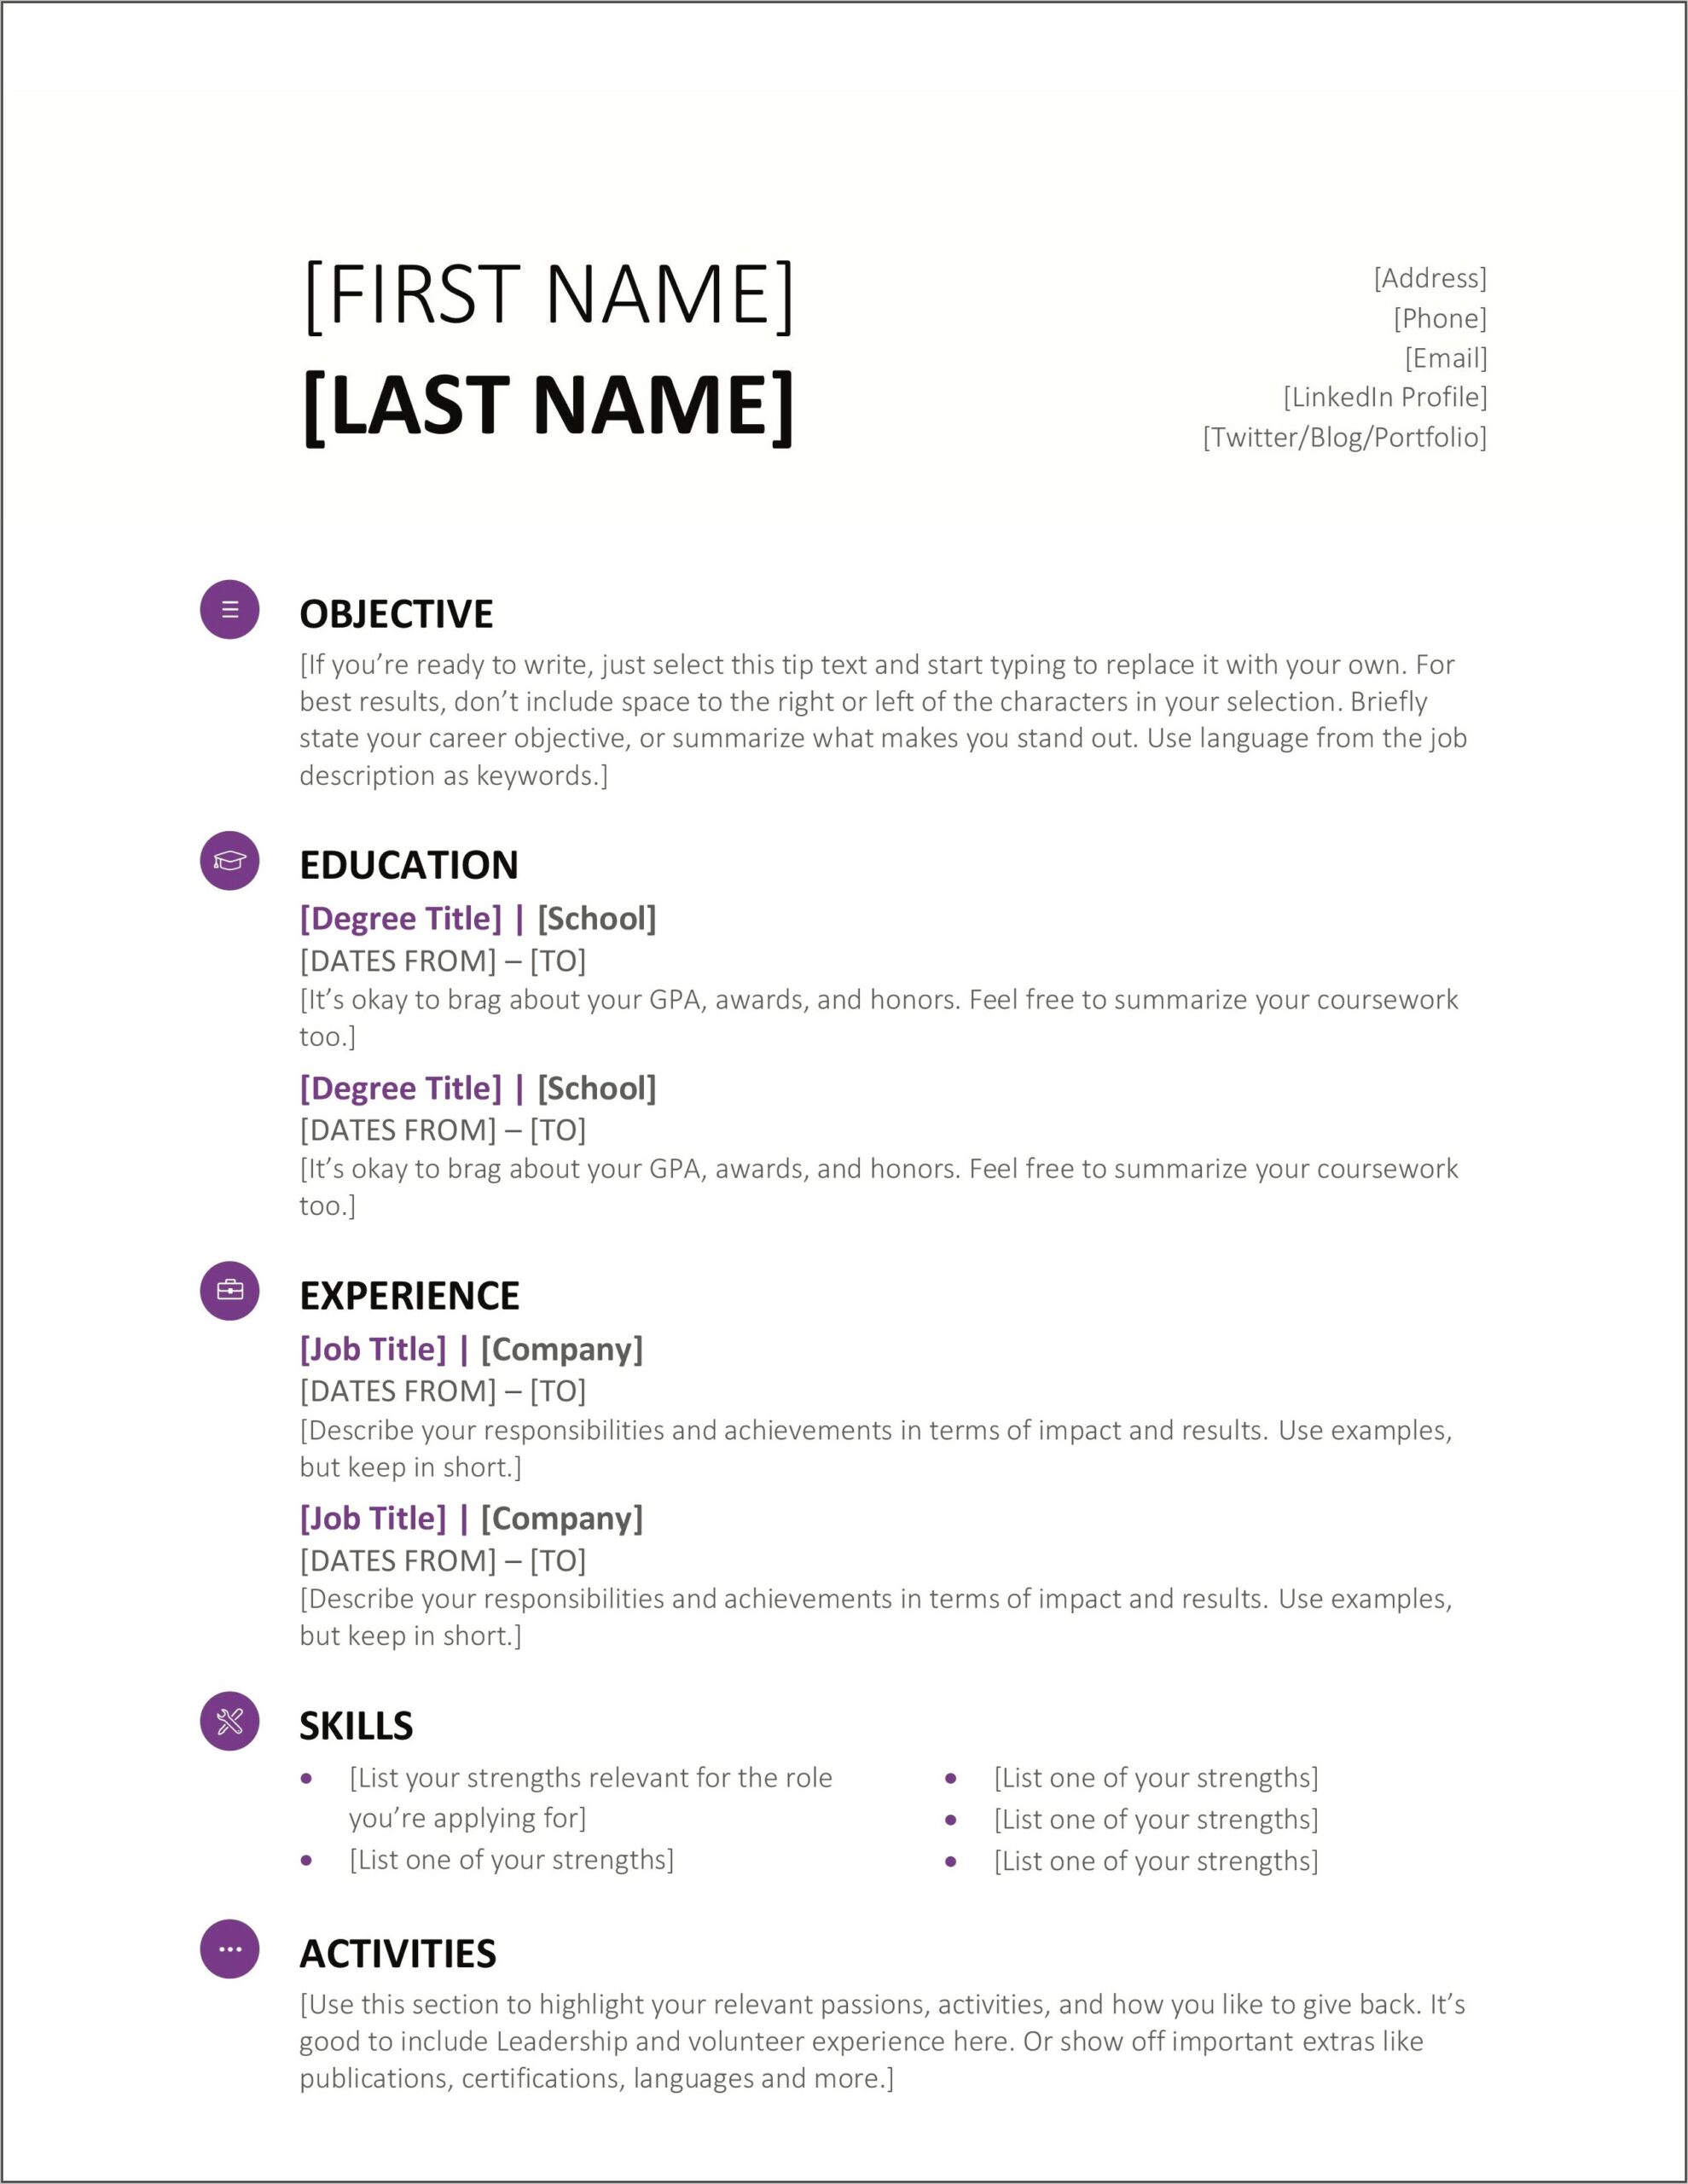 functional resume templates and open office document